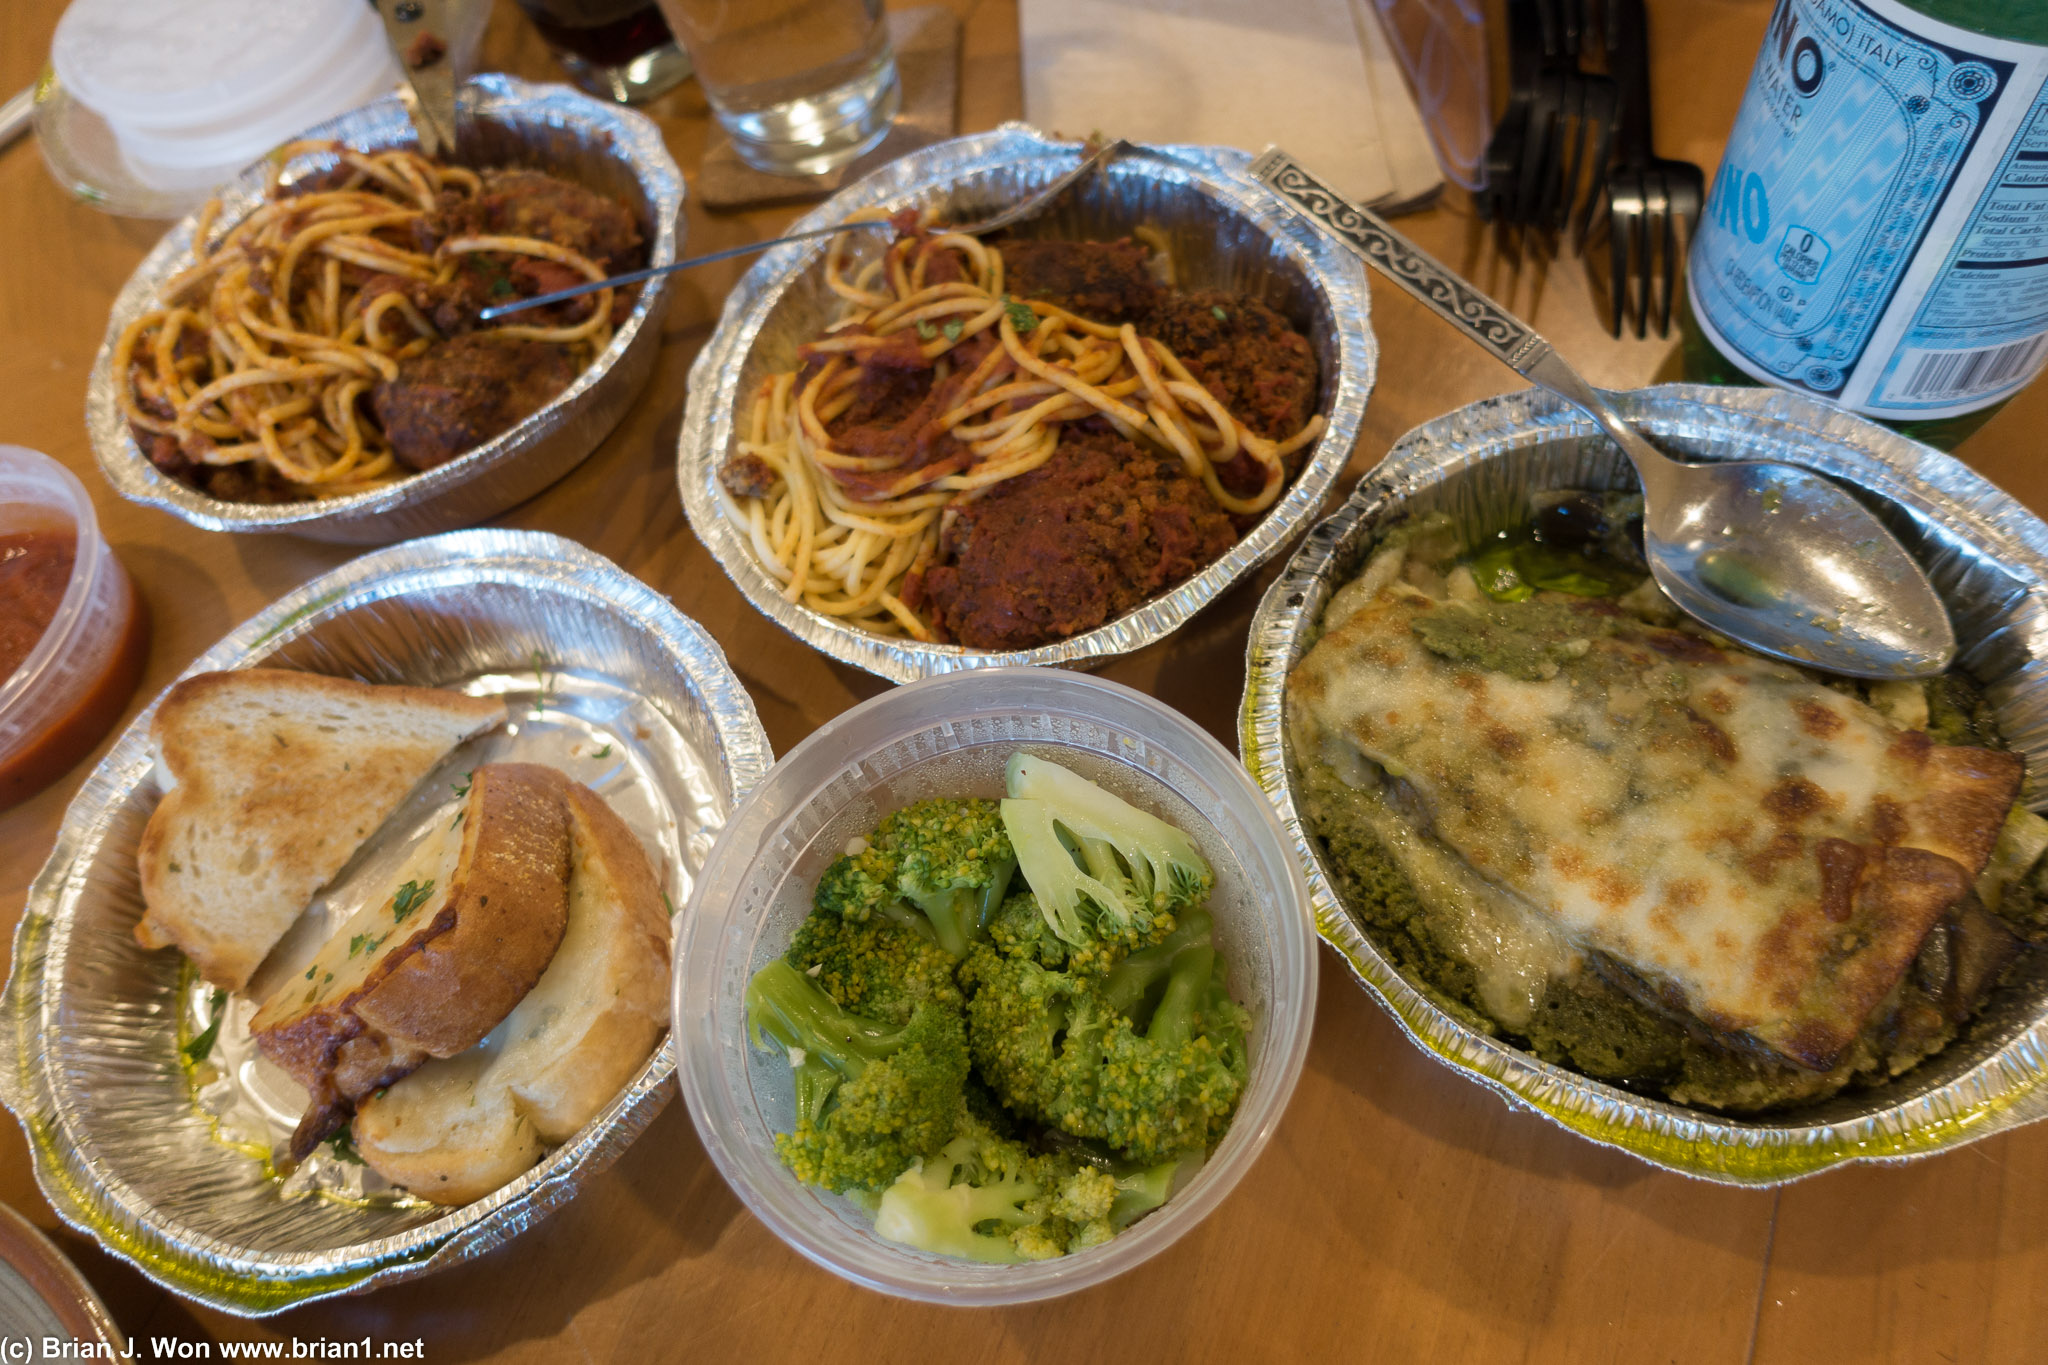 Lots of pasta from House of Meatballs.